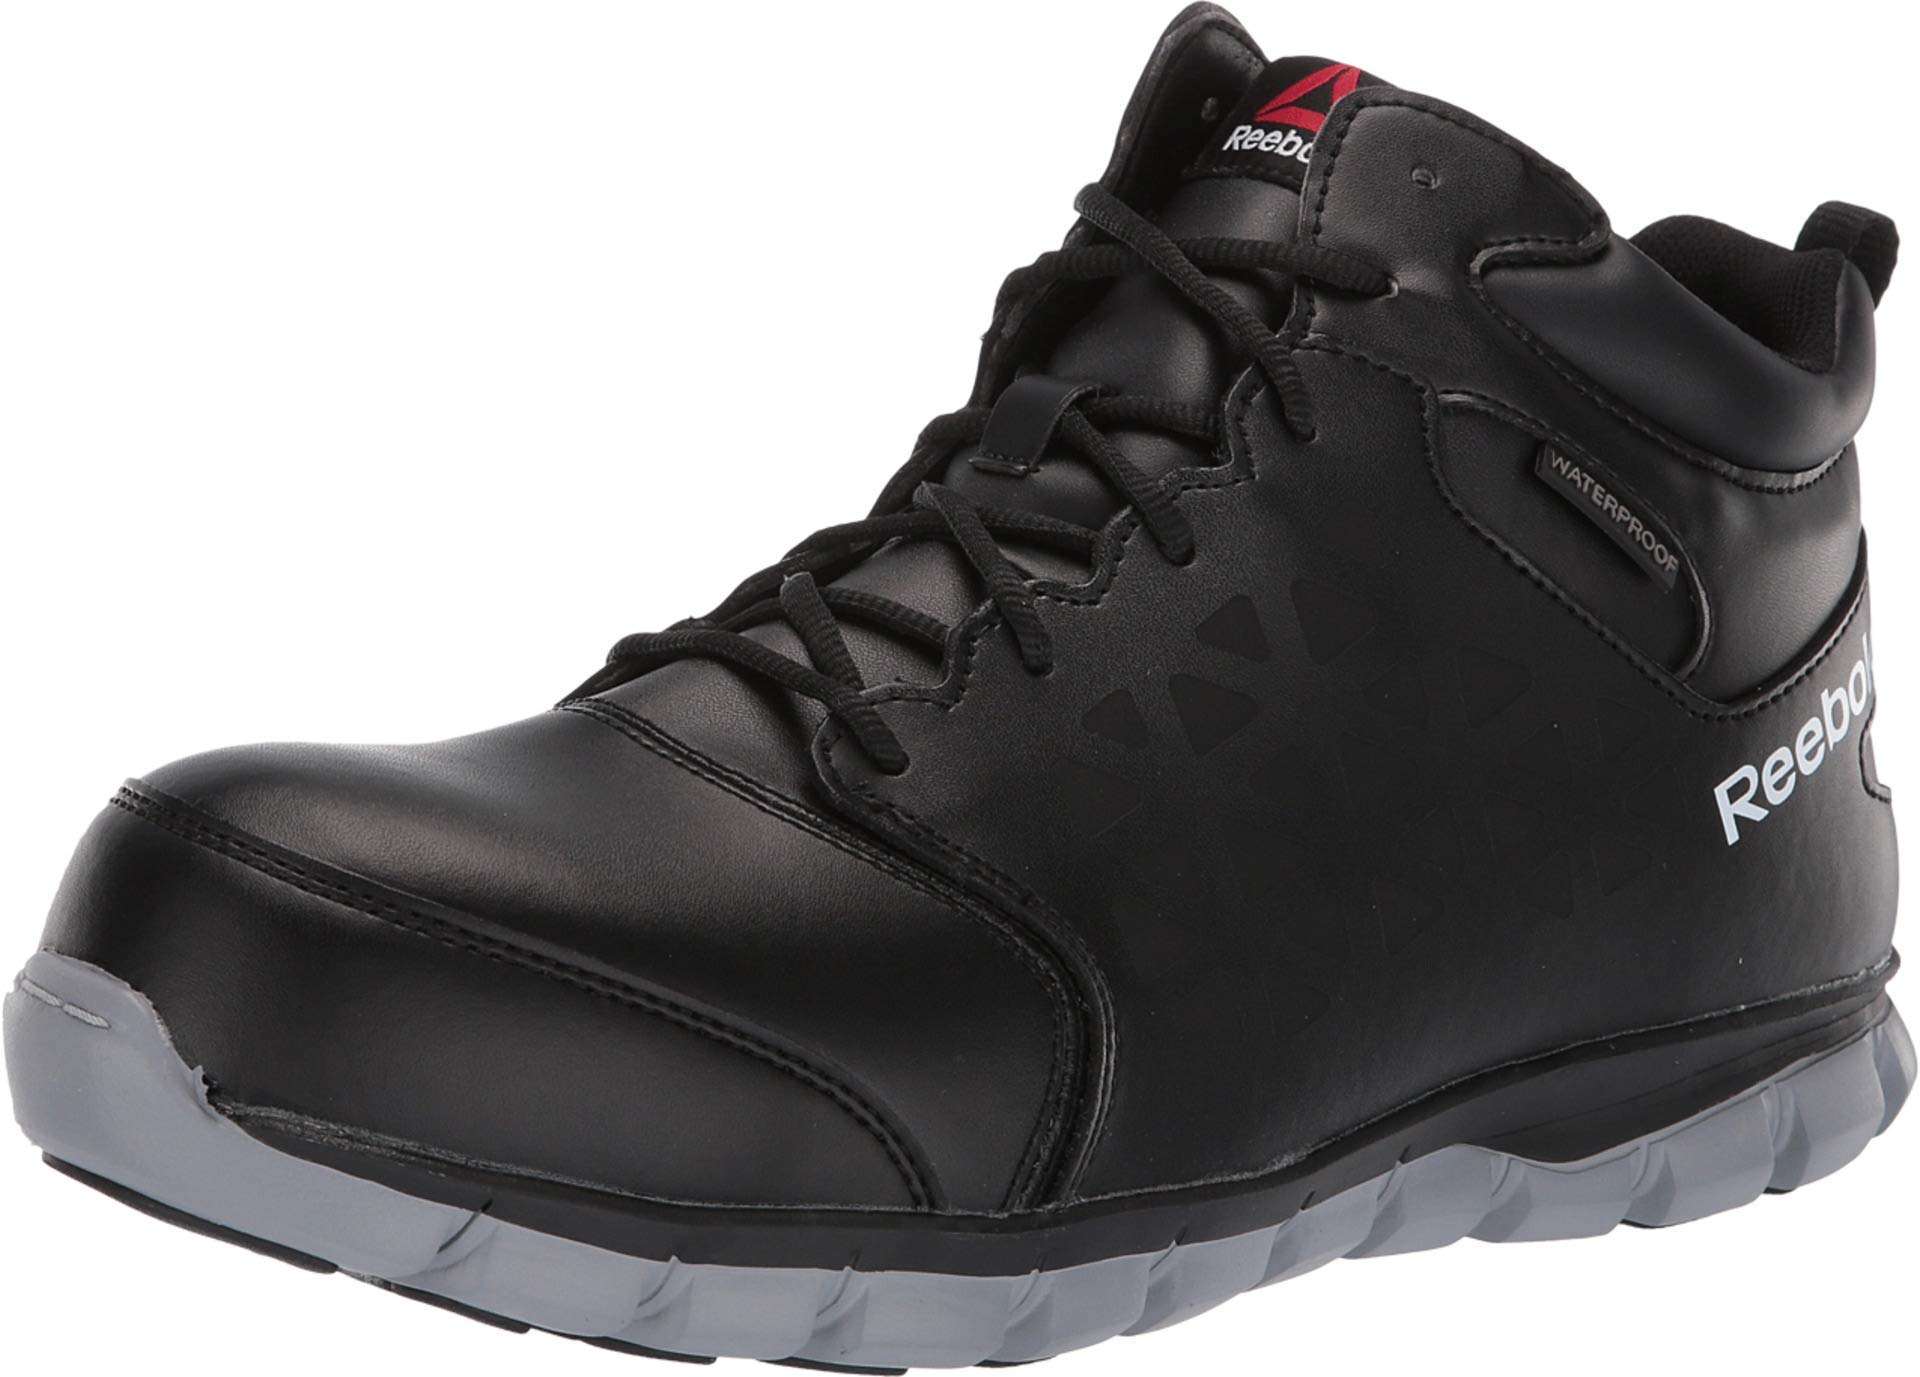 Reebok Men's Sublite Cushion Work Safety Toe Athletic Waterproof Mid-Cut Industrial & Construction Boot